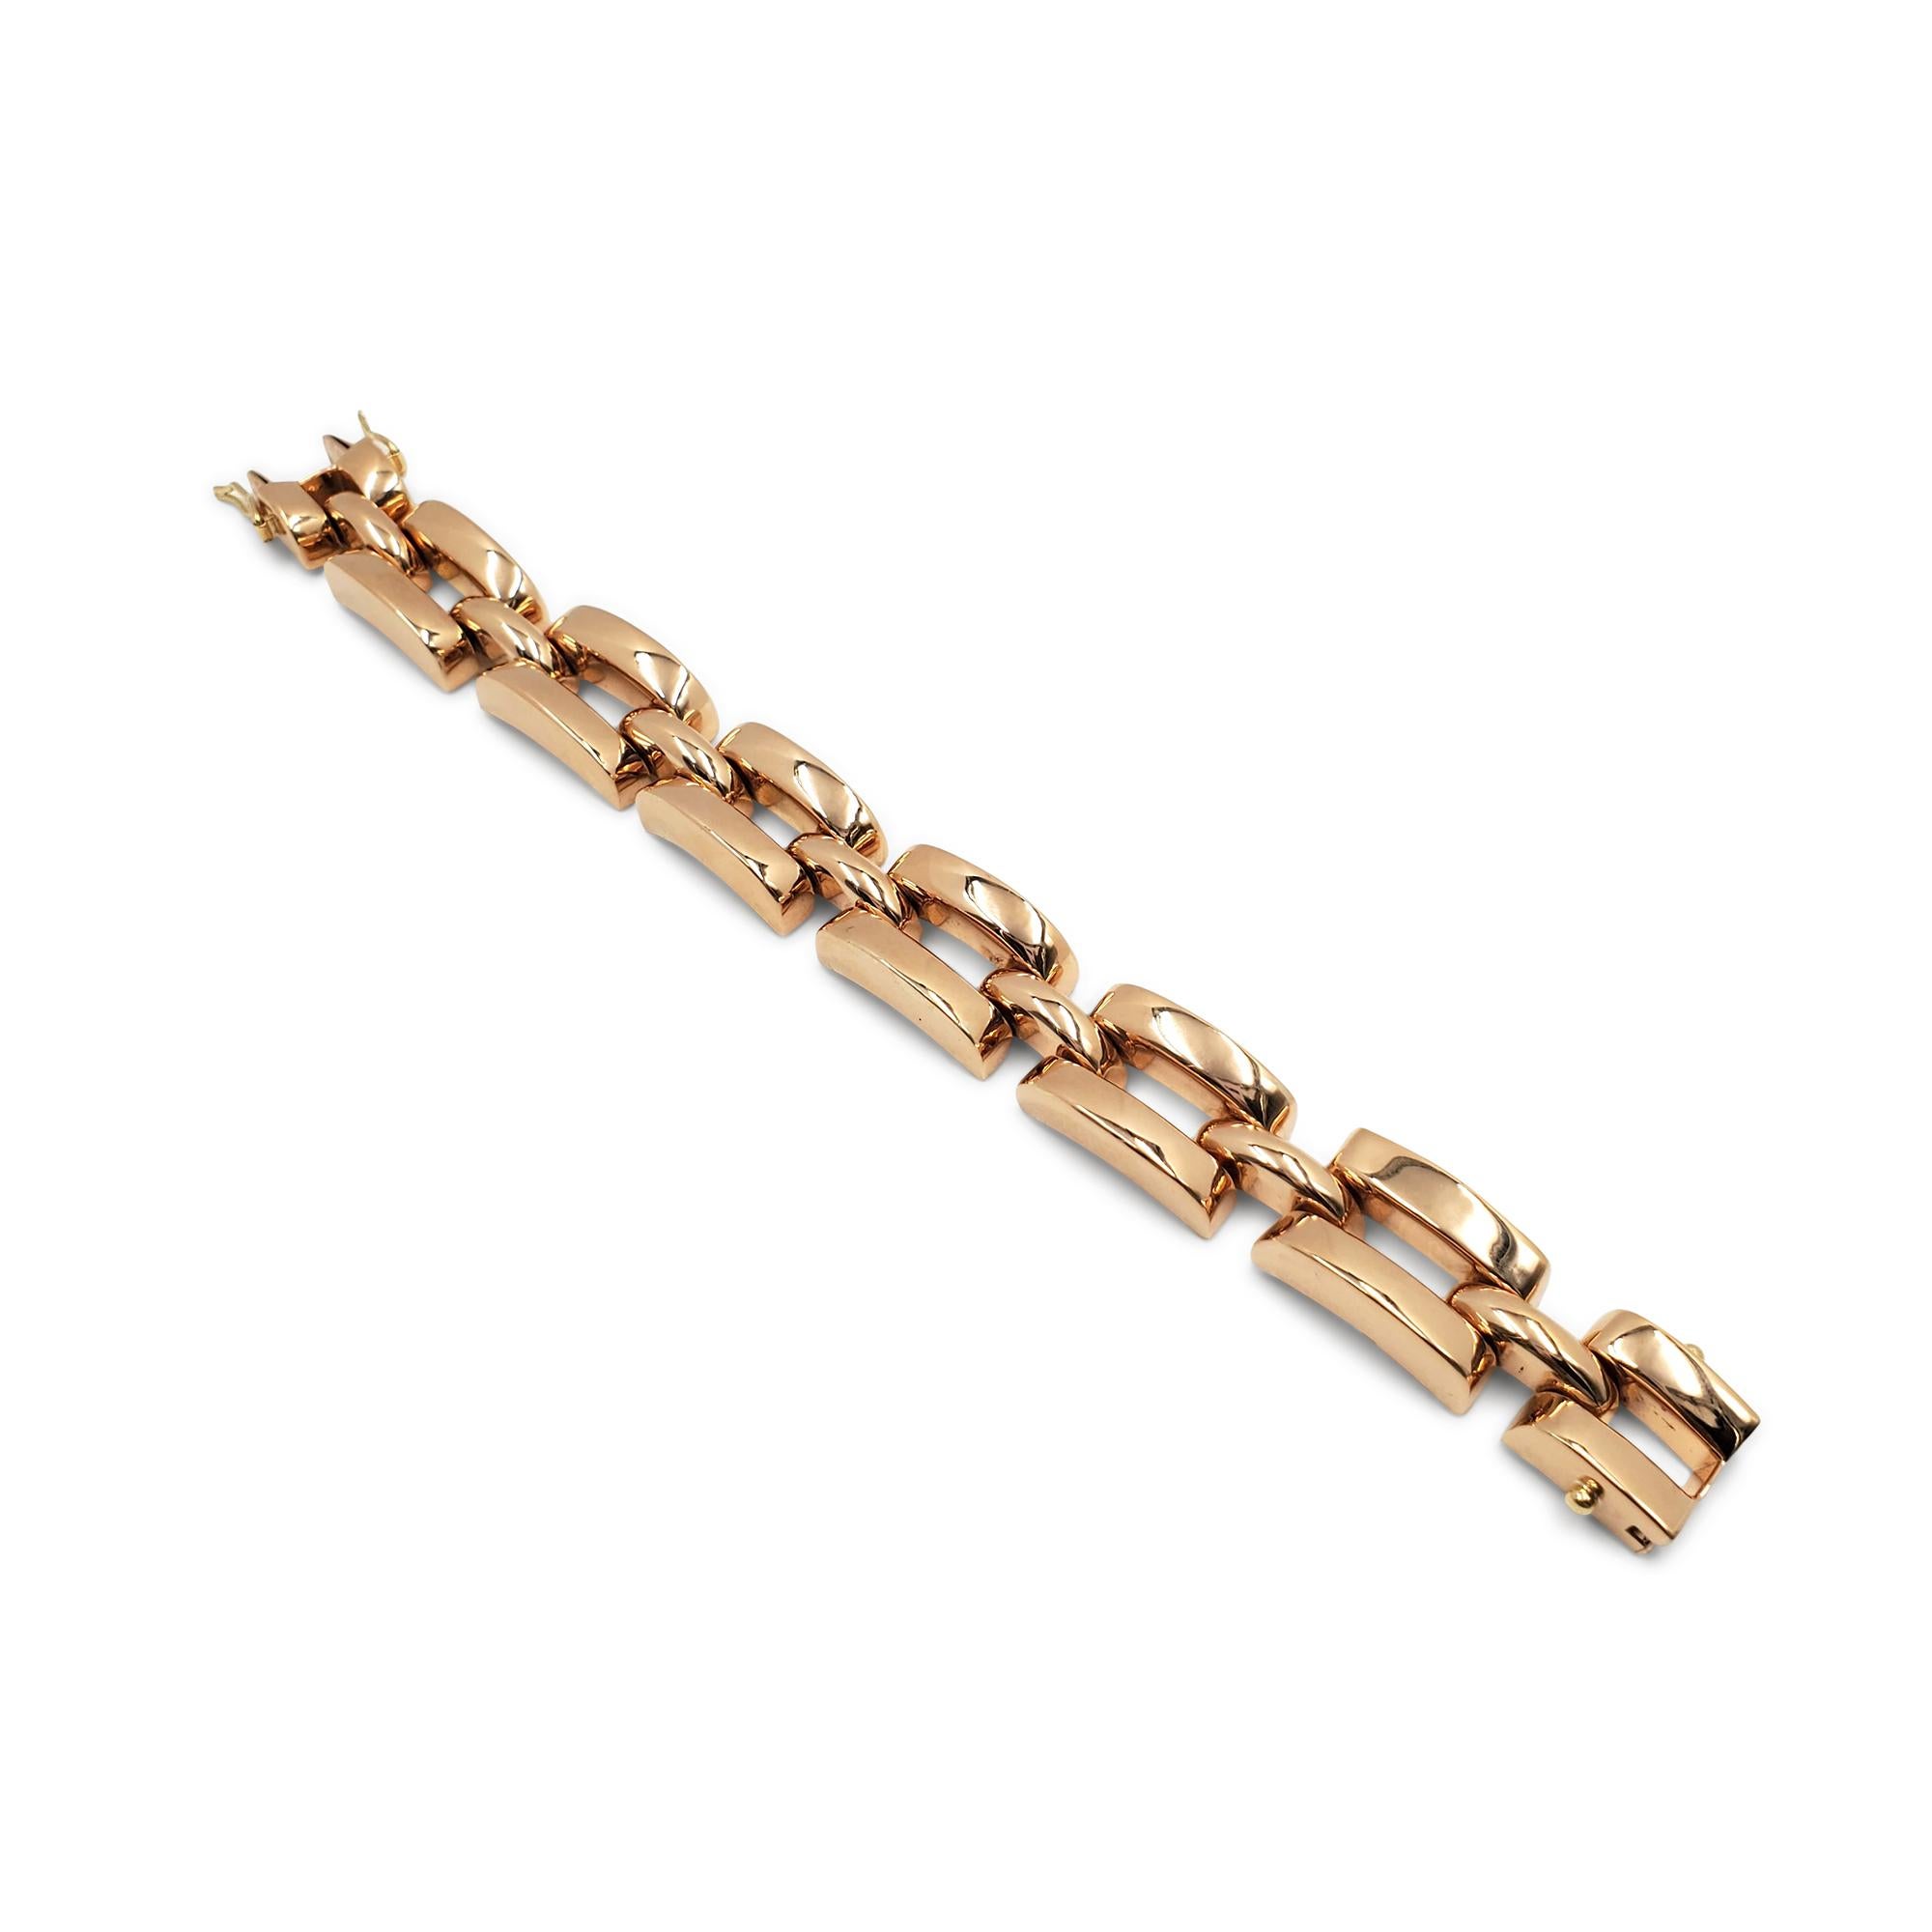 A chic retro tank track bracelet crafted in 18 karat rose gold.  The bracelet measures 7 3/4 inches in length and .63 inches in width with a box clasp.  Stamped 18K with maker's mark.  CIRCA 1940s

Metal: 18K Rose Gold
Condition: Excellent
Wear: